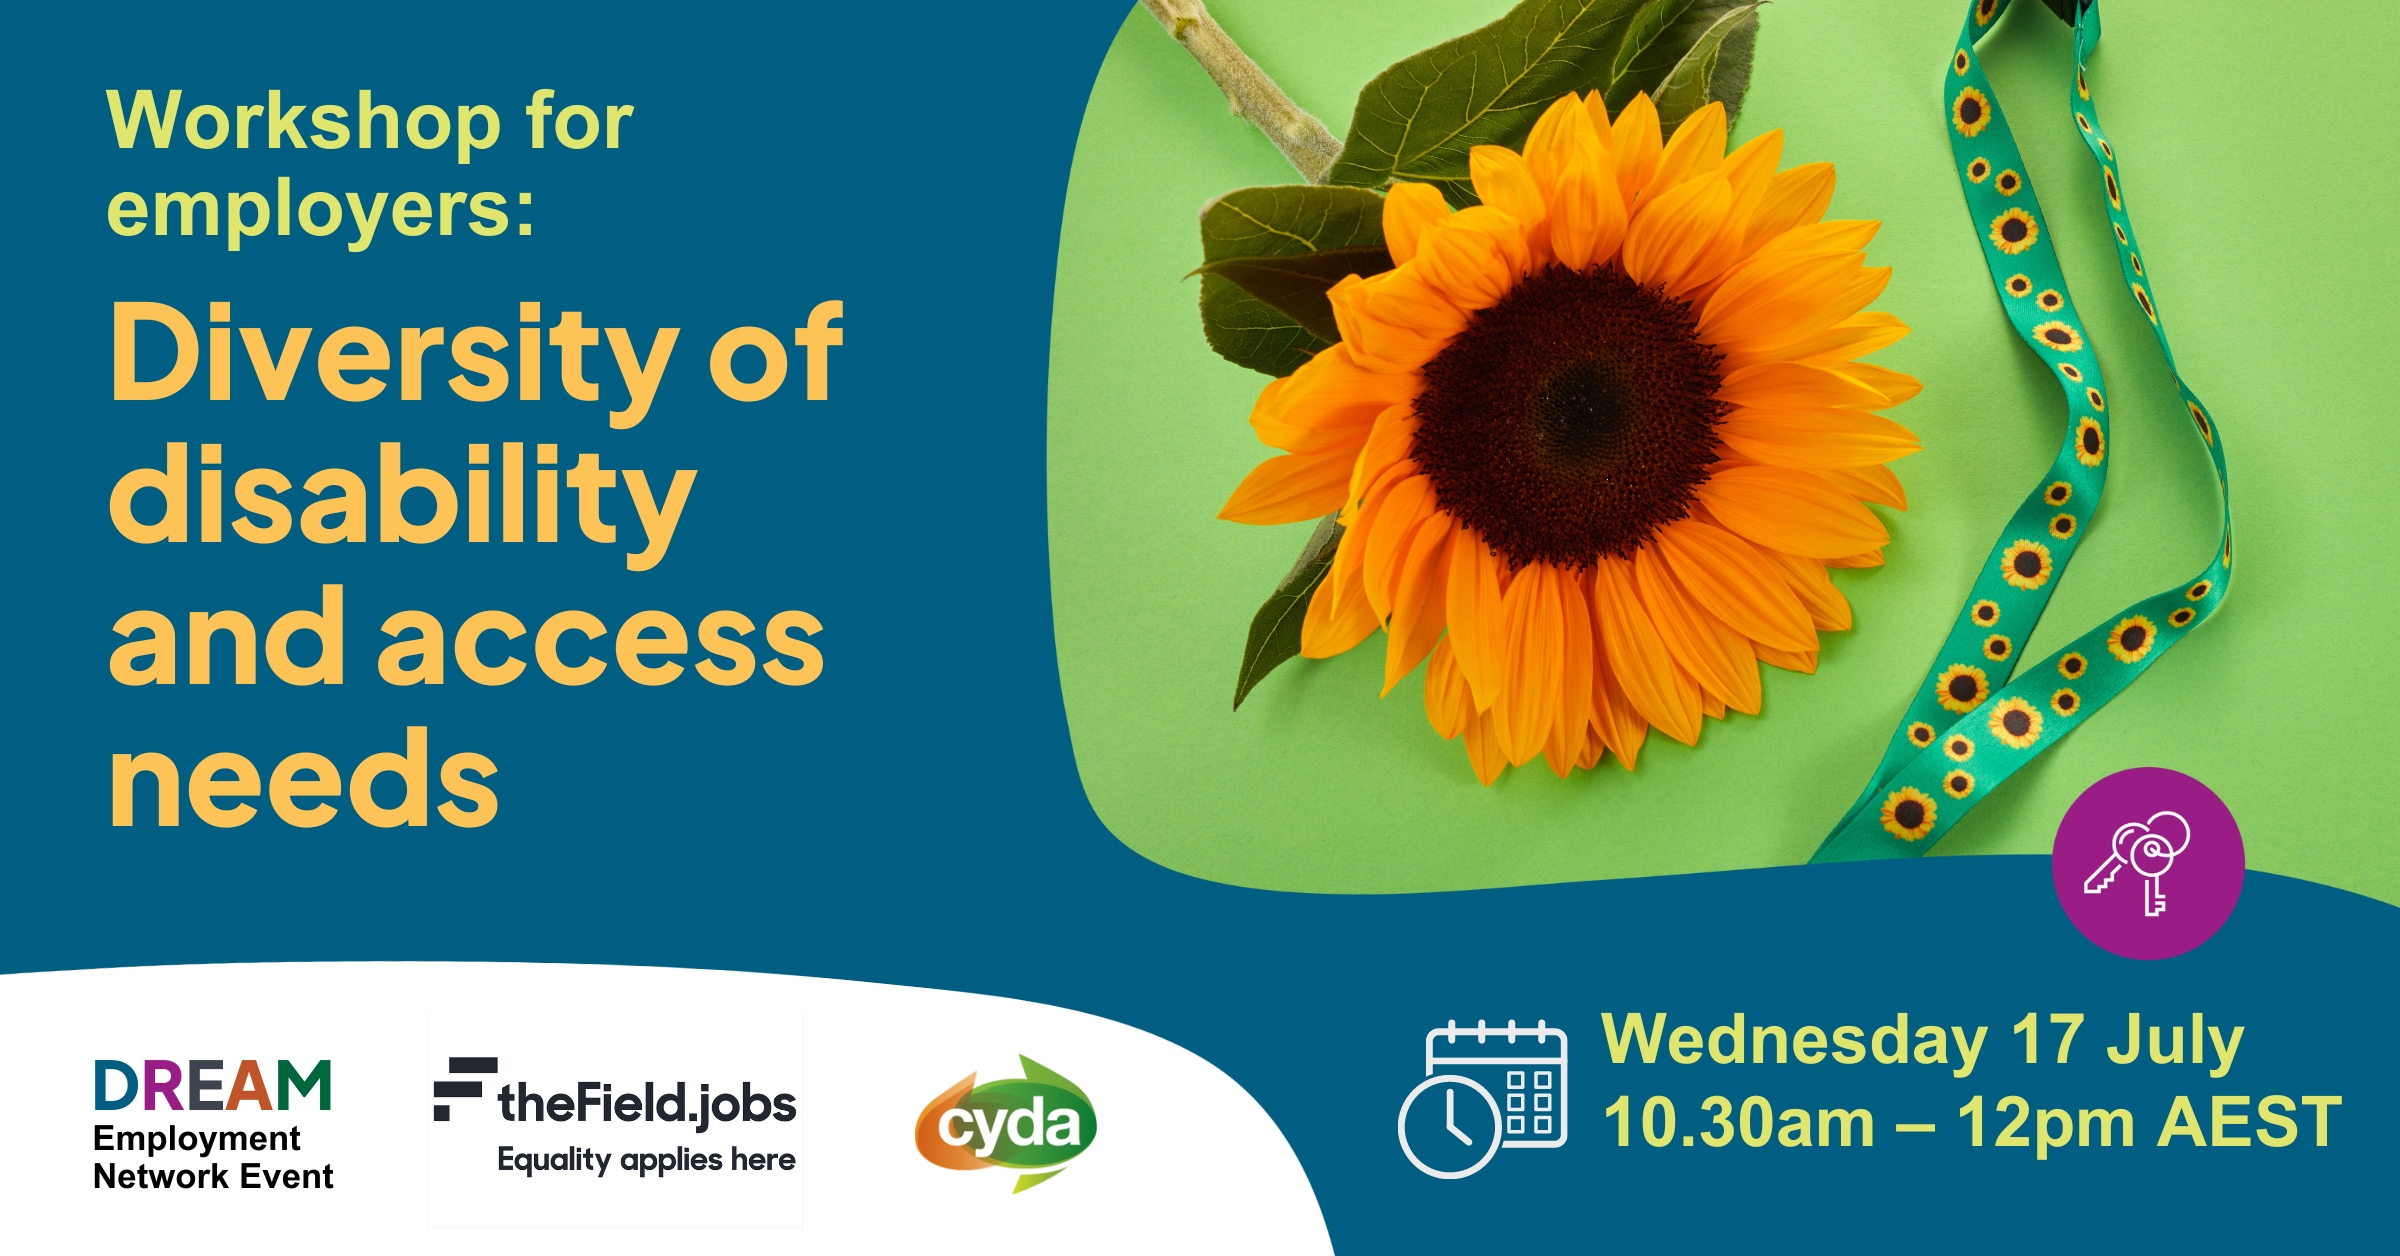 Text reads: “Workshop for employers: Diversity of disability and access needs. Wednesday 17 July 10.30am-12pm AEST”. To the right is a photo of a large sunflower next to a green lanyard with sunflowers on it. Below the photo is a purple icon of a key. The logos for the DREAM Employment Network, The Field and CYDA bit bottom left.